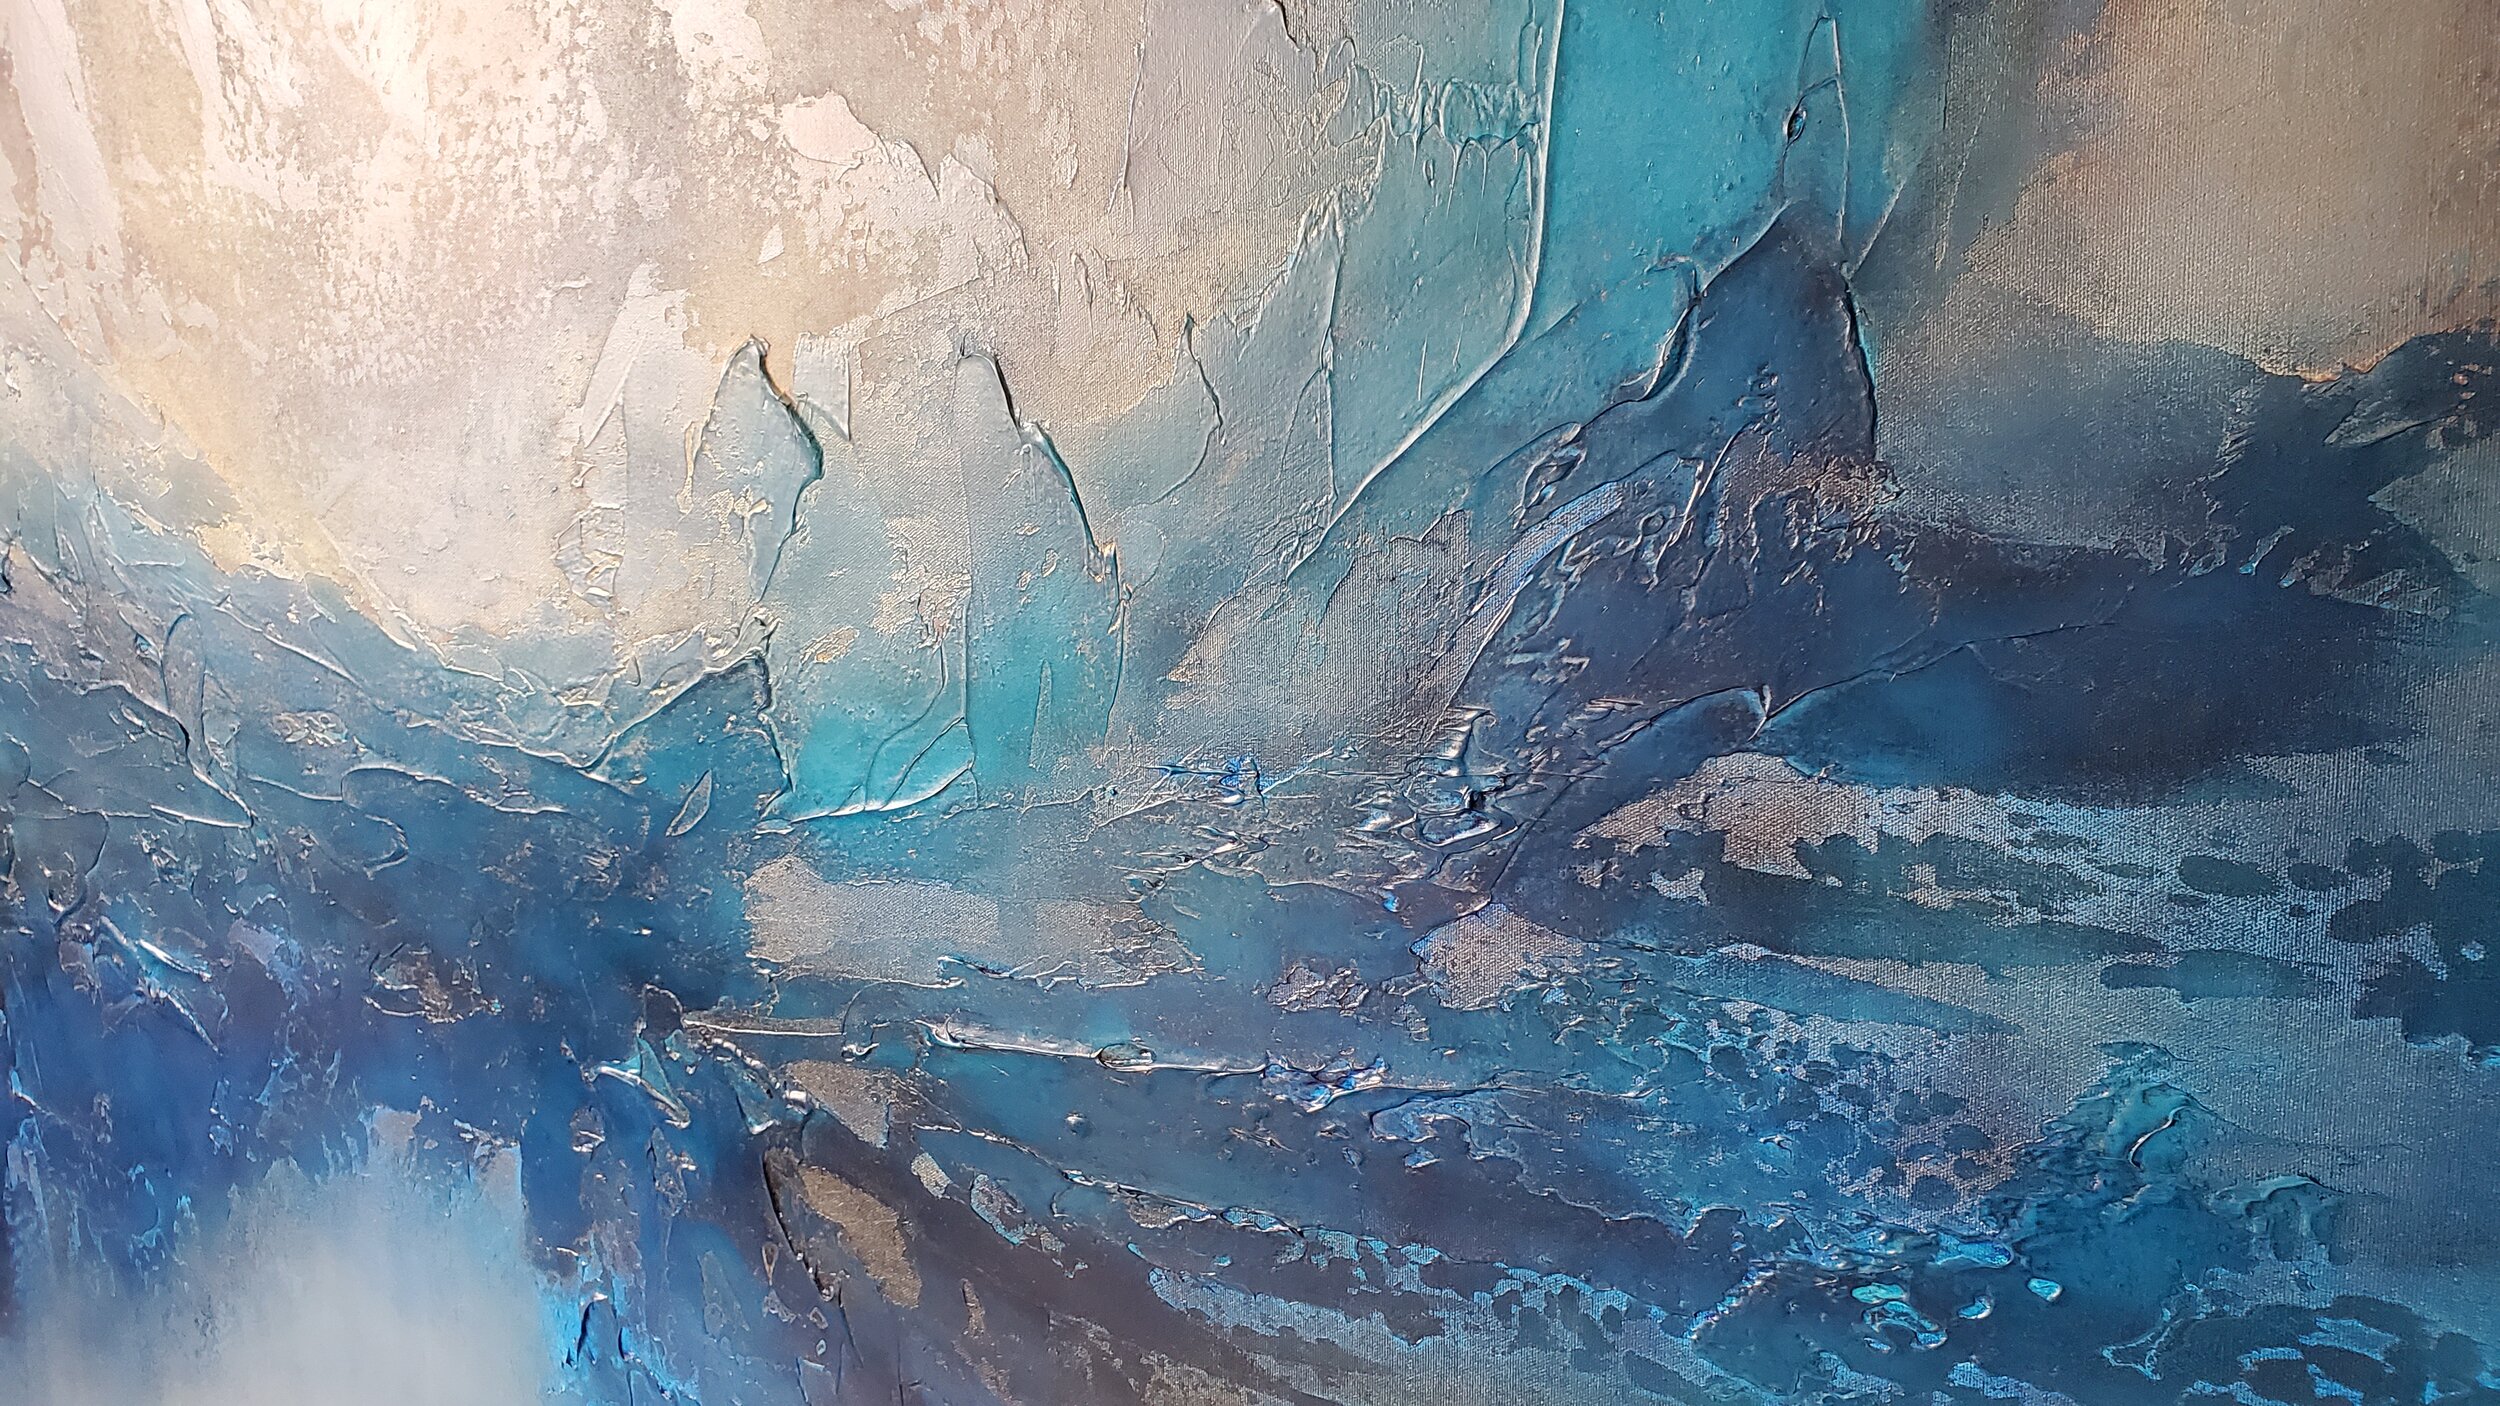  Painting #2 Unknown - Vancouver abstract painter, Donna Giraud has eleven new available artworks for sale in her 2020 solo art exhibition titled, Lost and Found. Her large scale, abstract, textural artworks are perfect for any interior design aesthe